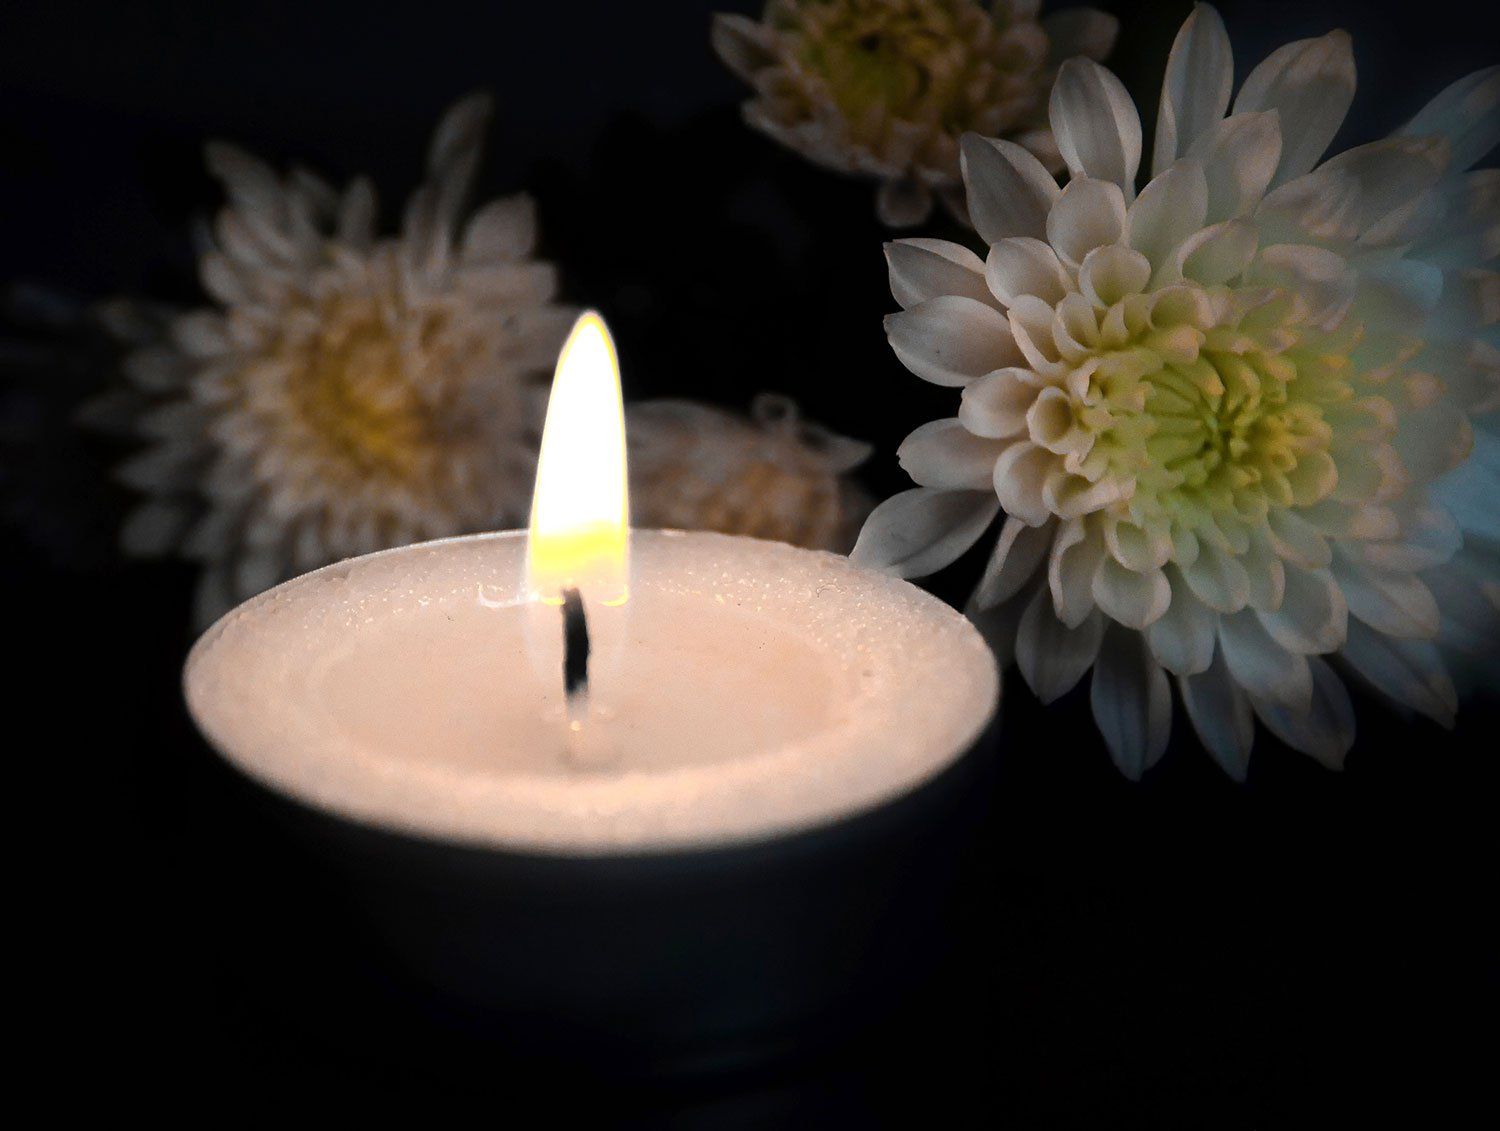 single lit candle with flowers in the background, aj lock, funeral services, weston, burnham